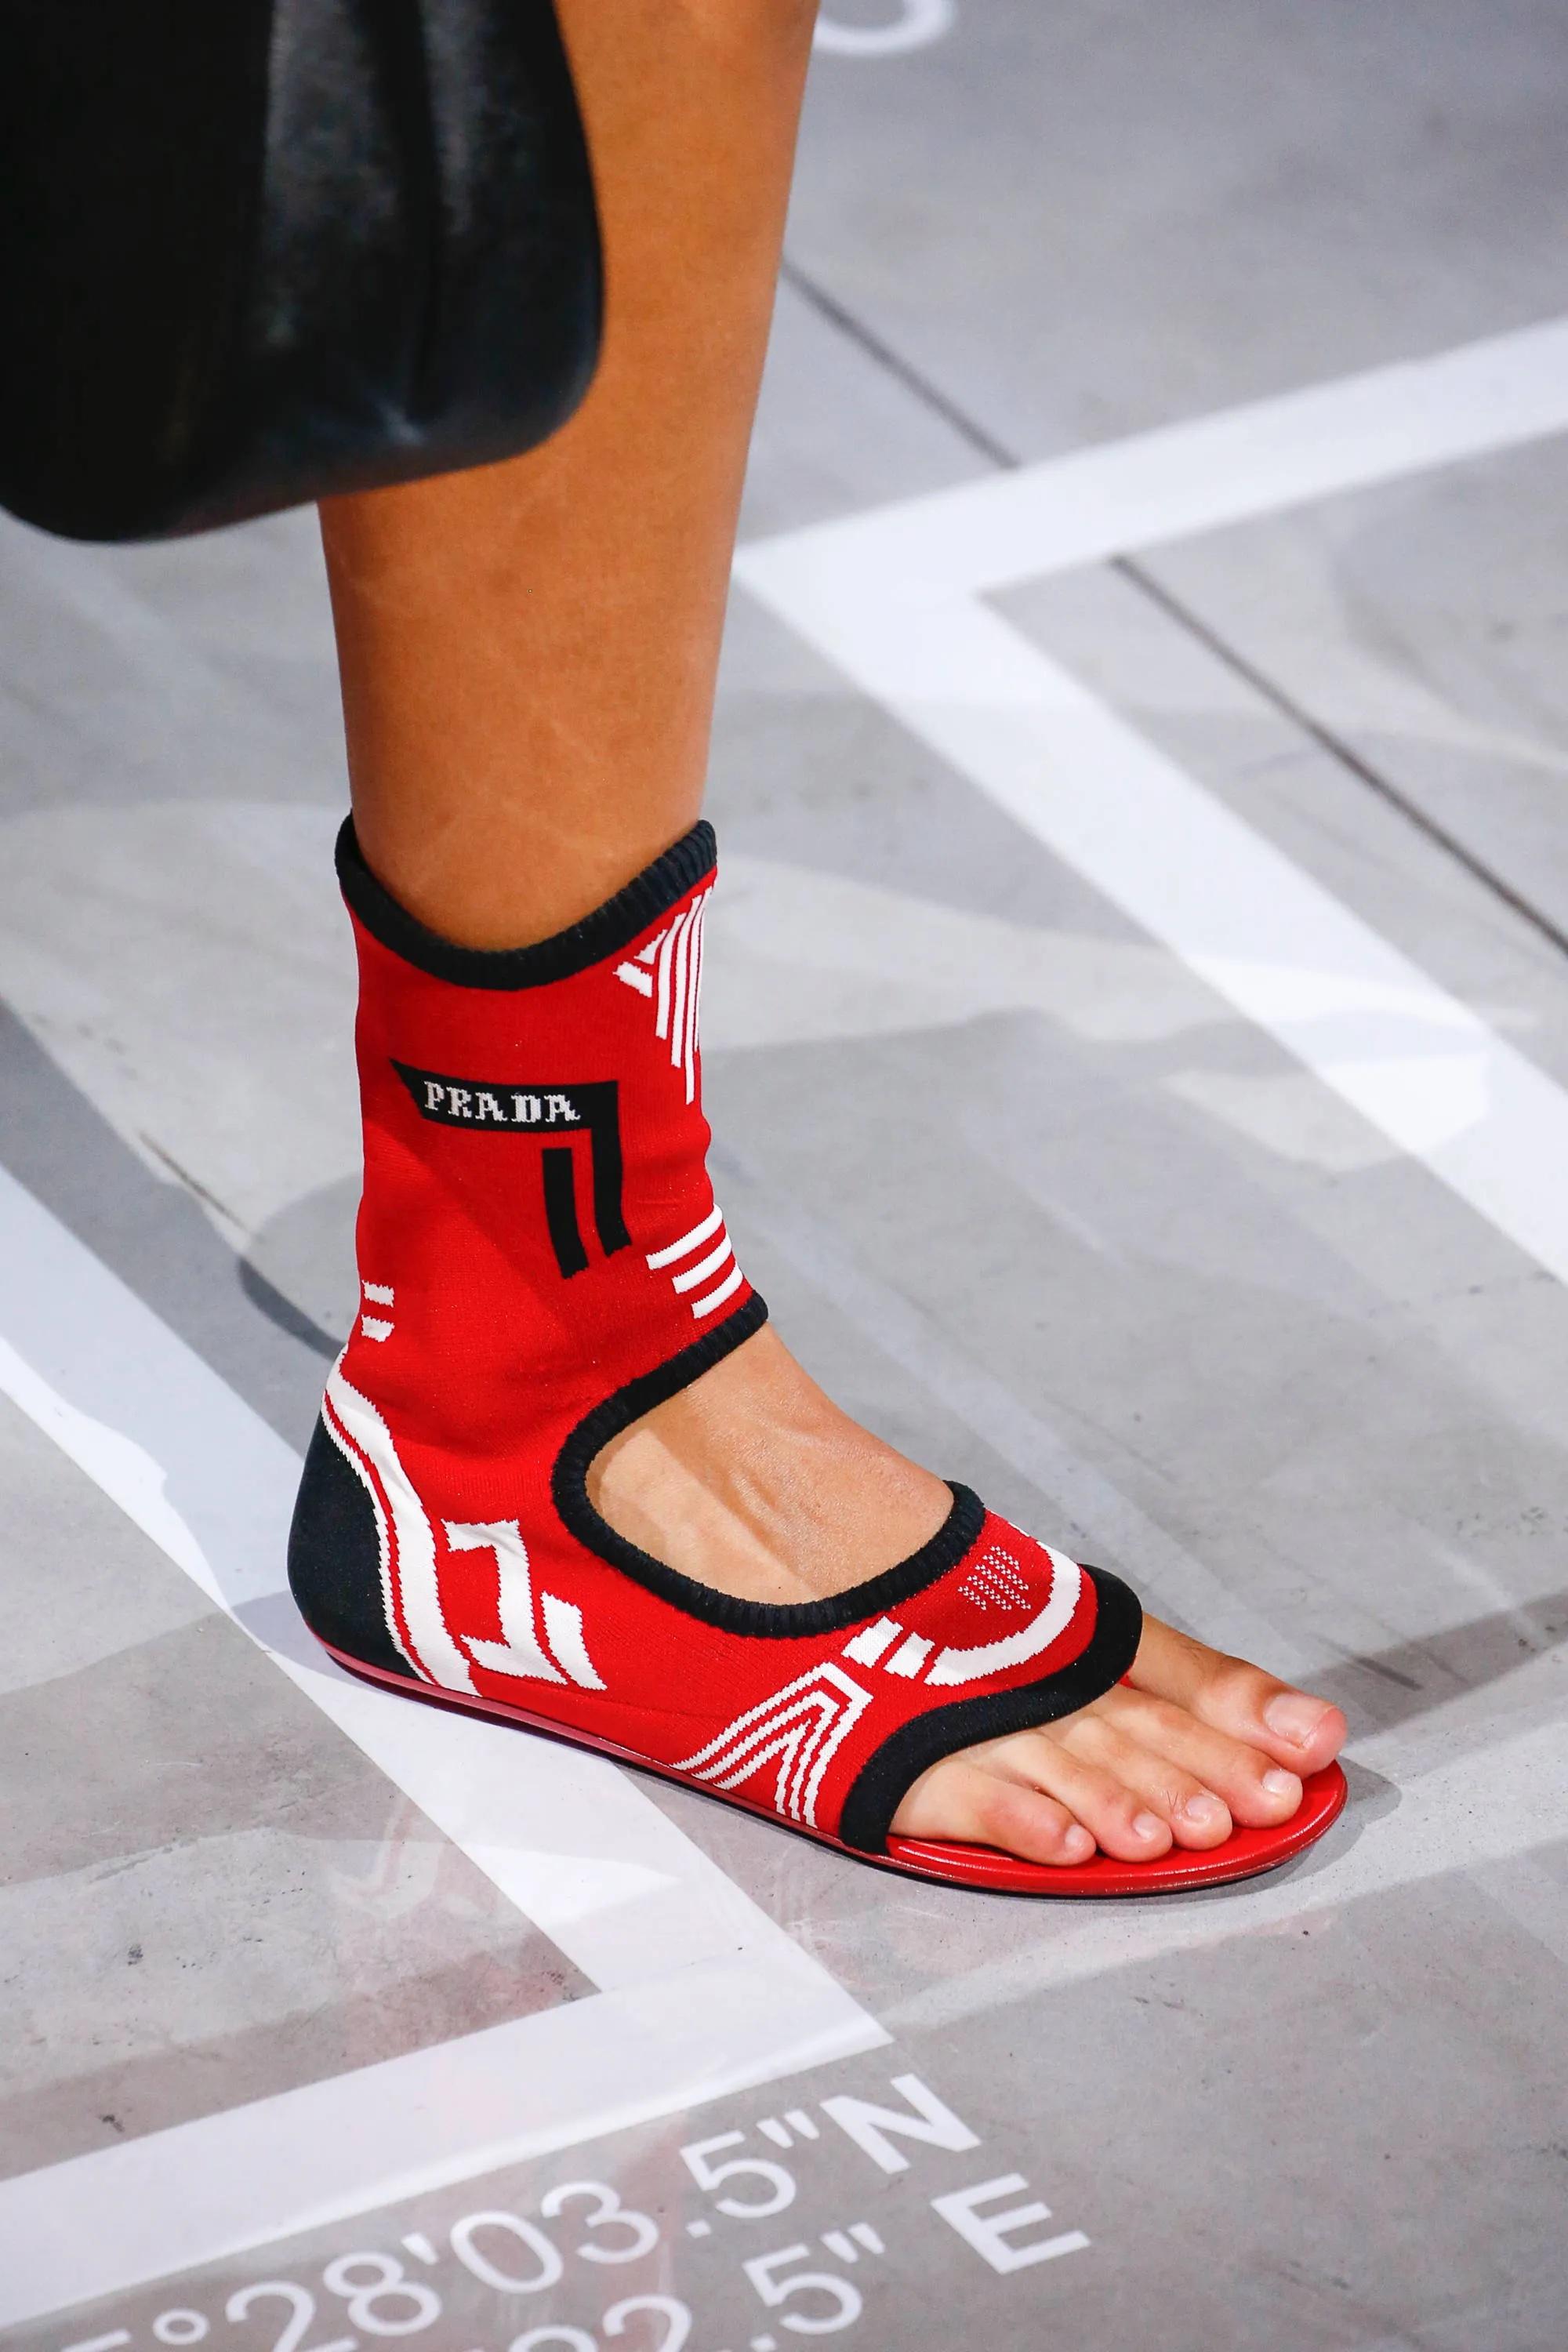 Black Prada flat knit lurex gladiator thong sandals as featured on the Spring/Summer '19 runway collection.

Hits partially up the calf and covers most of the foot.

White Prada logo knit on the outer sides.

Round toes.

Slip on.

Snug fit hugs the